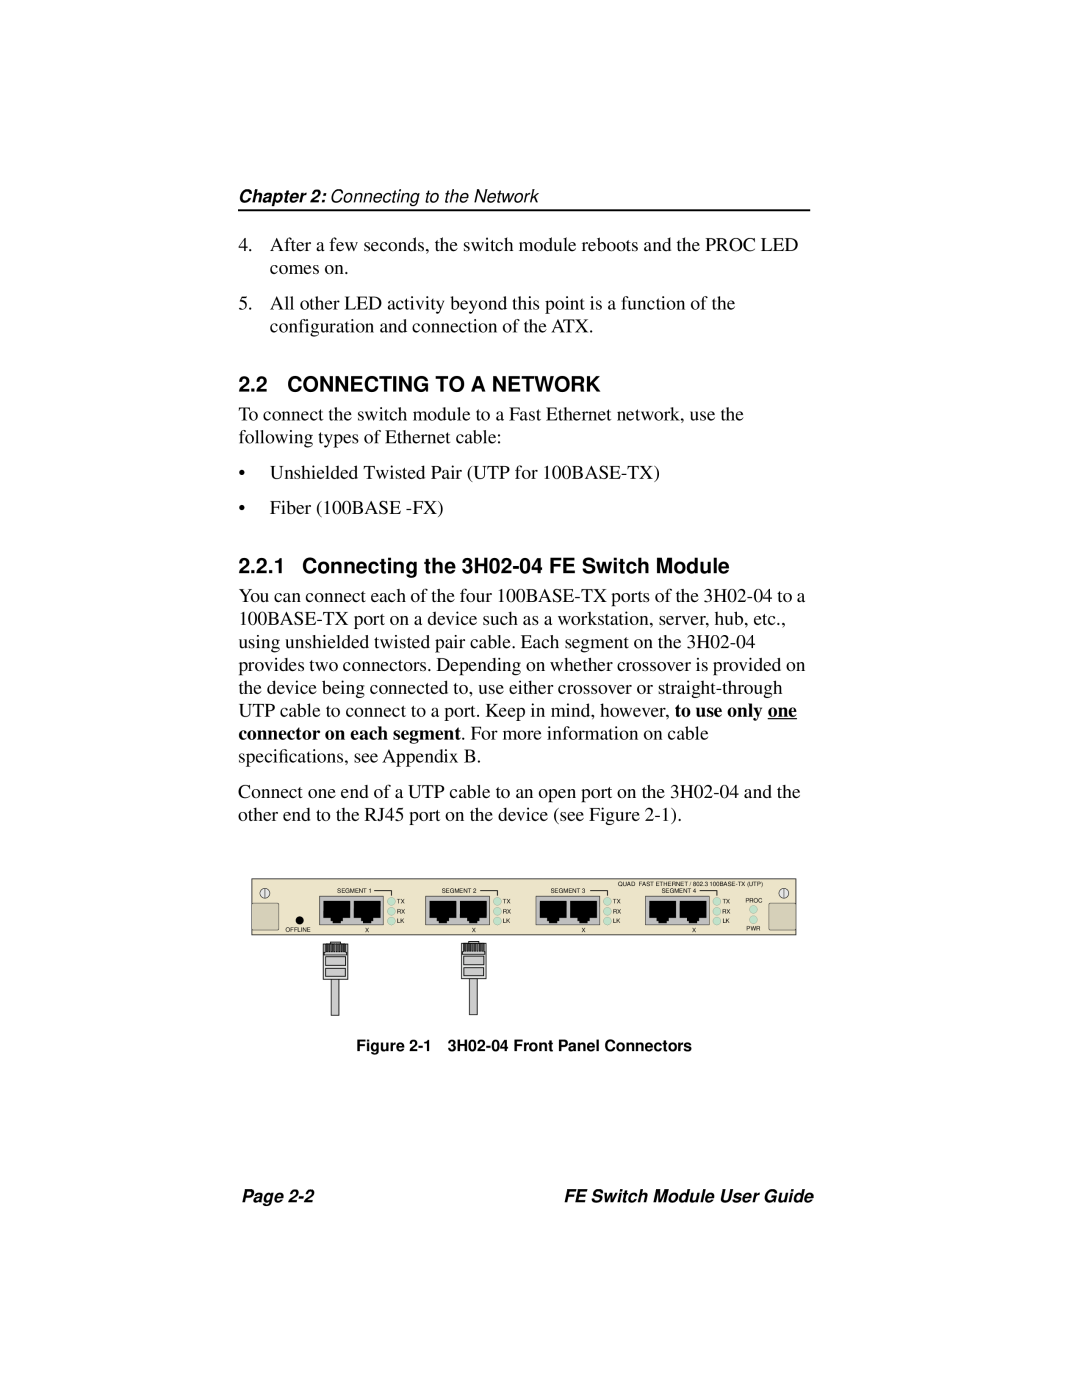 Cabletron Systems 3H08-04 manual Connecting To A Network, Connecting the 3H02-04 FE Switch Module 